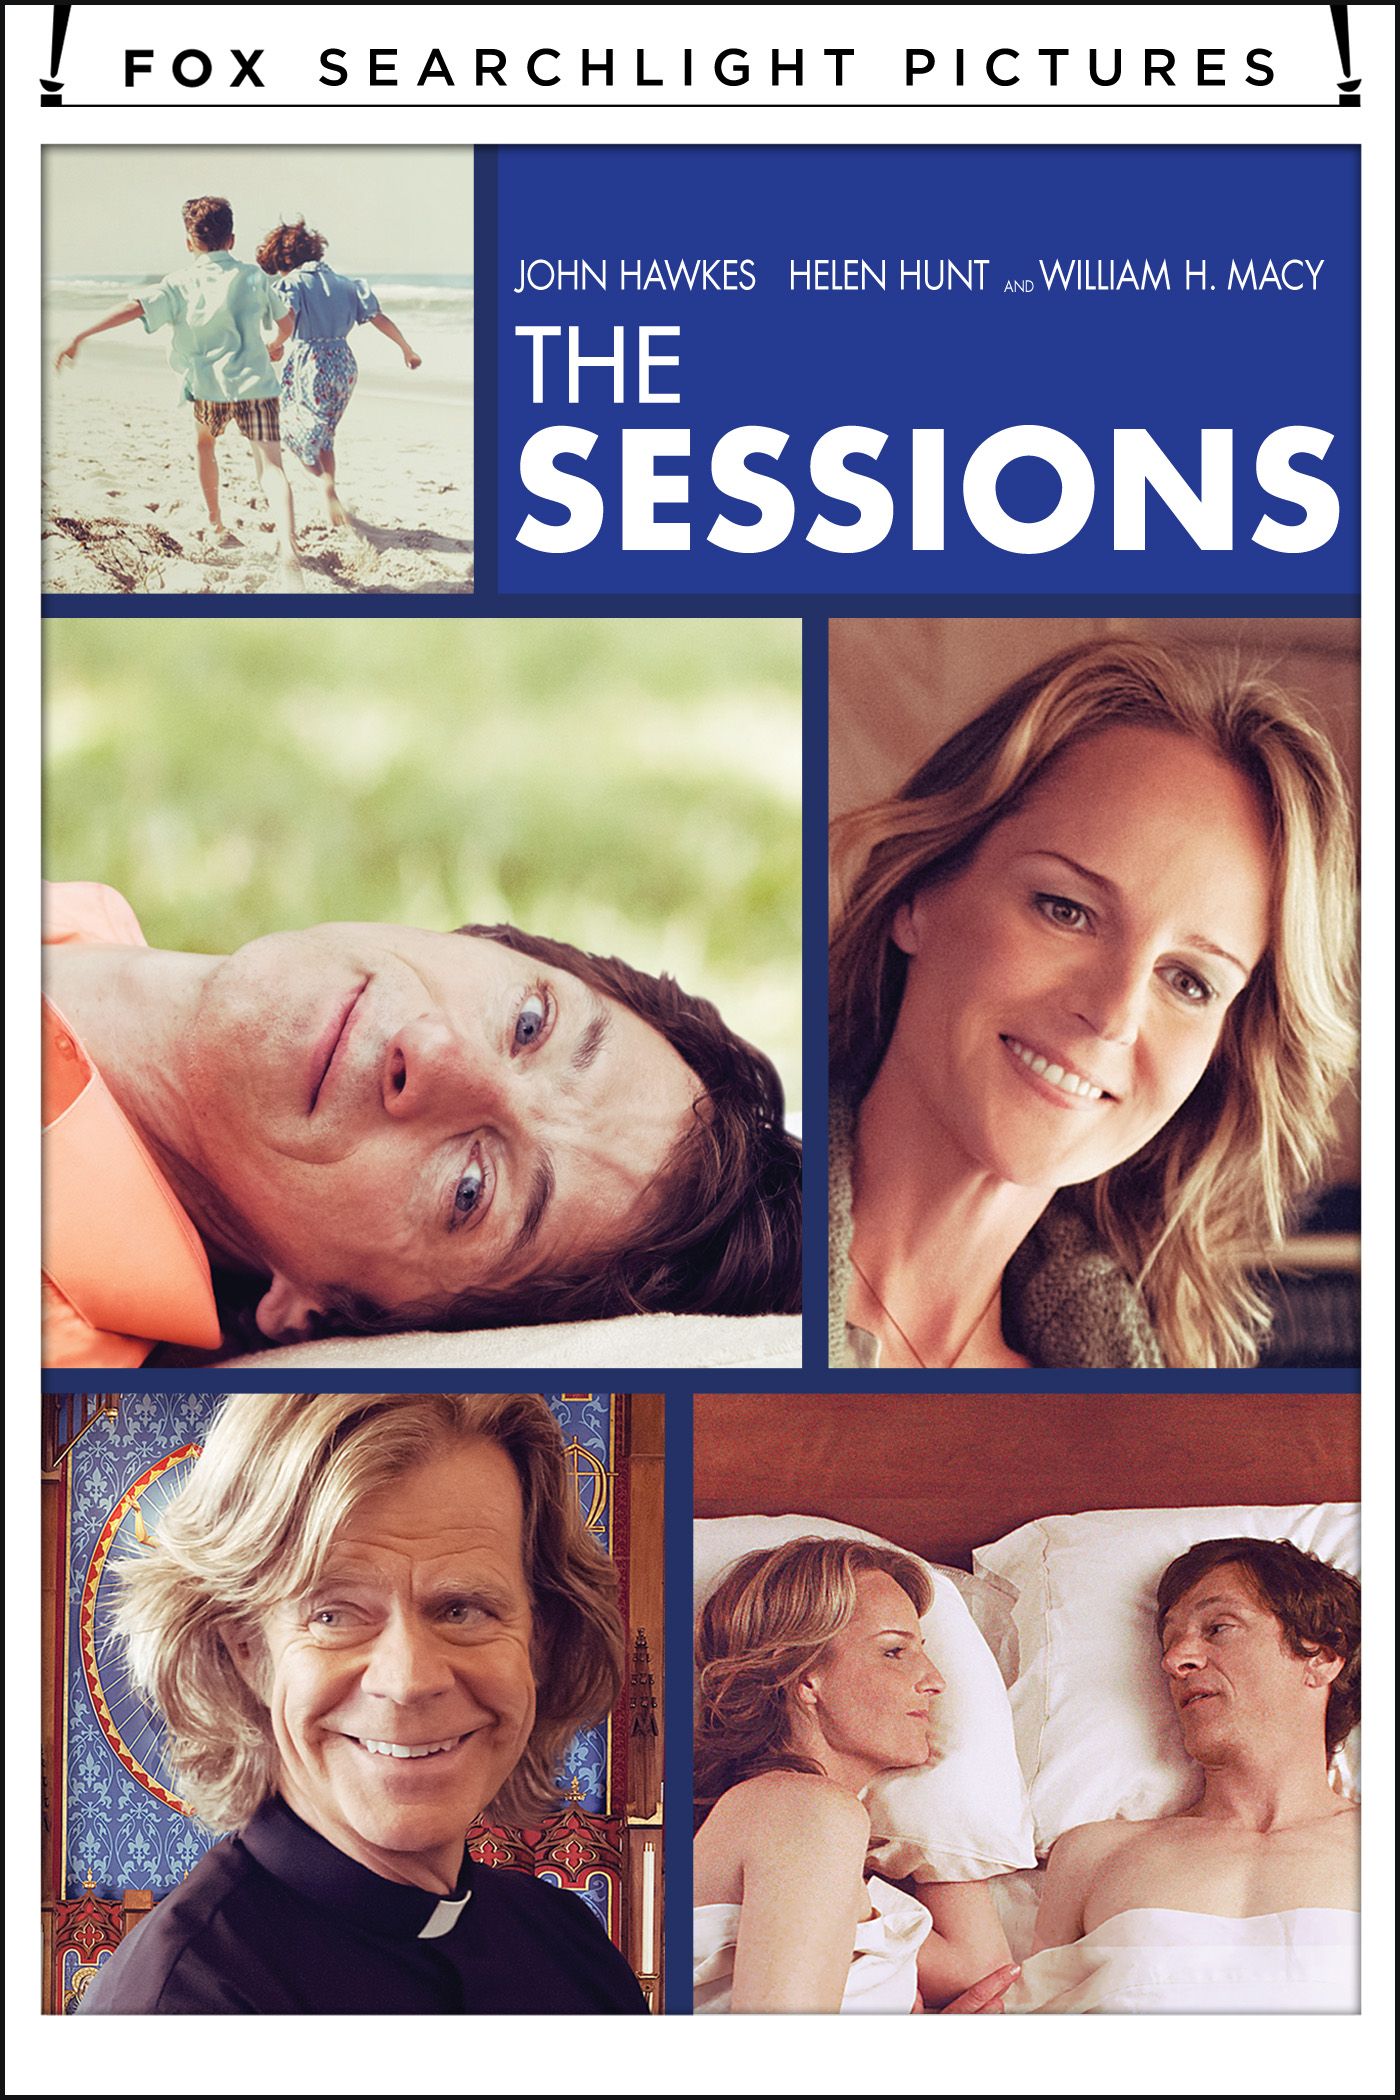 The Session Full Movie